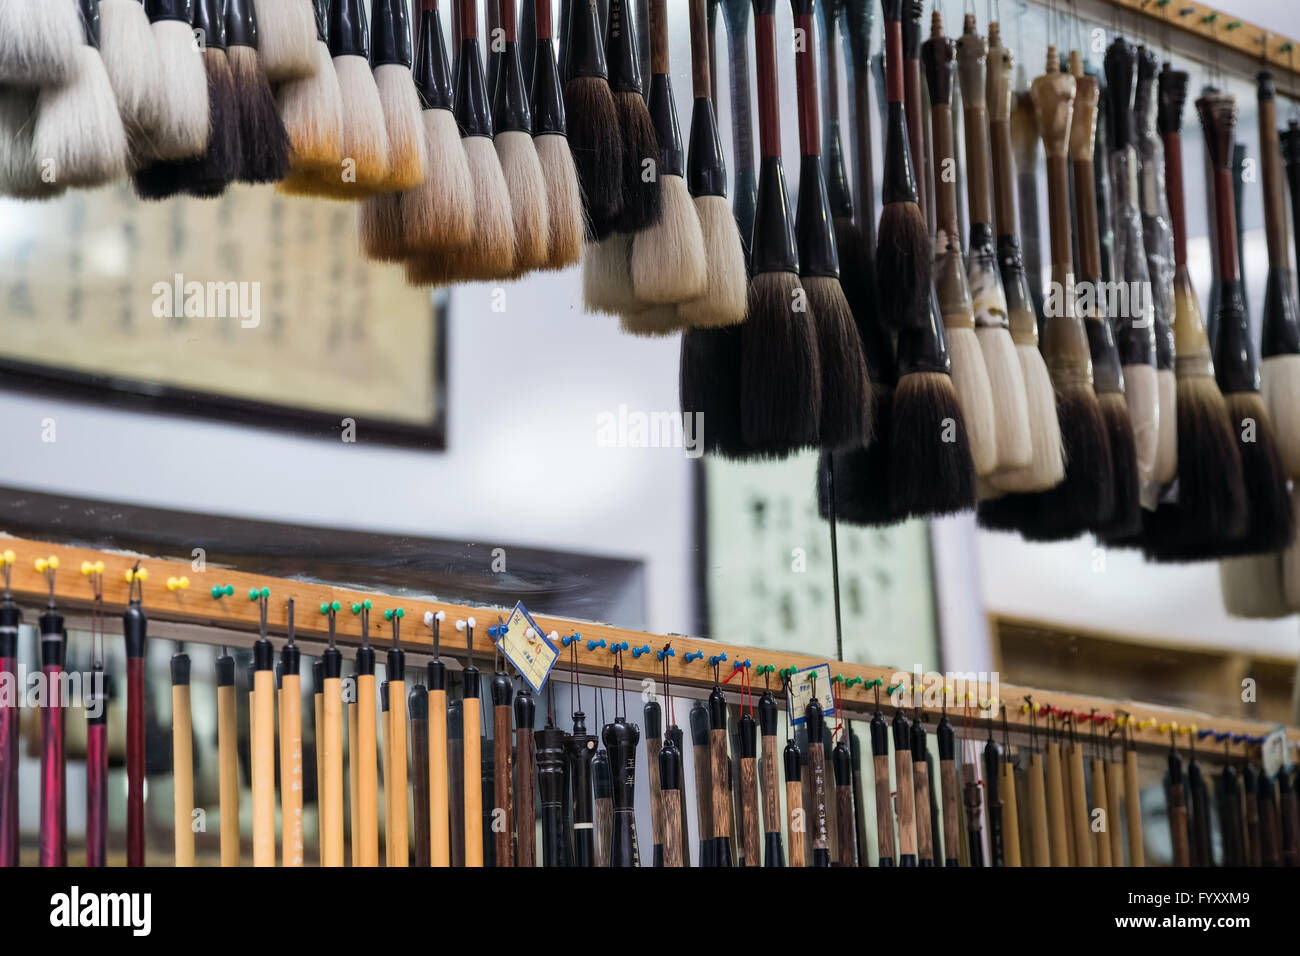 Brushes for Chinese calligraphy Stock Photo